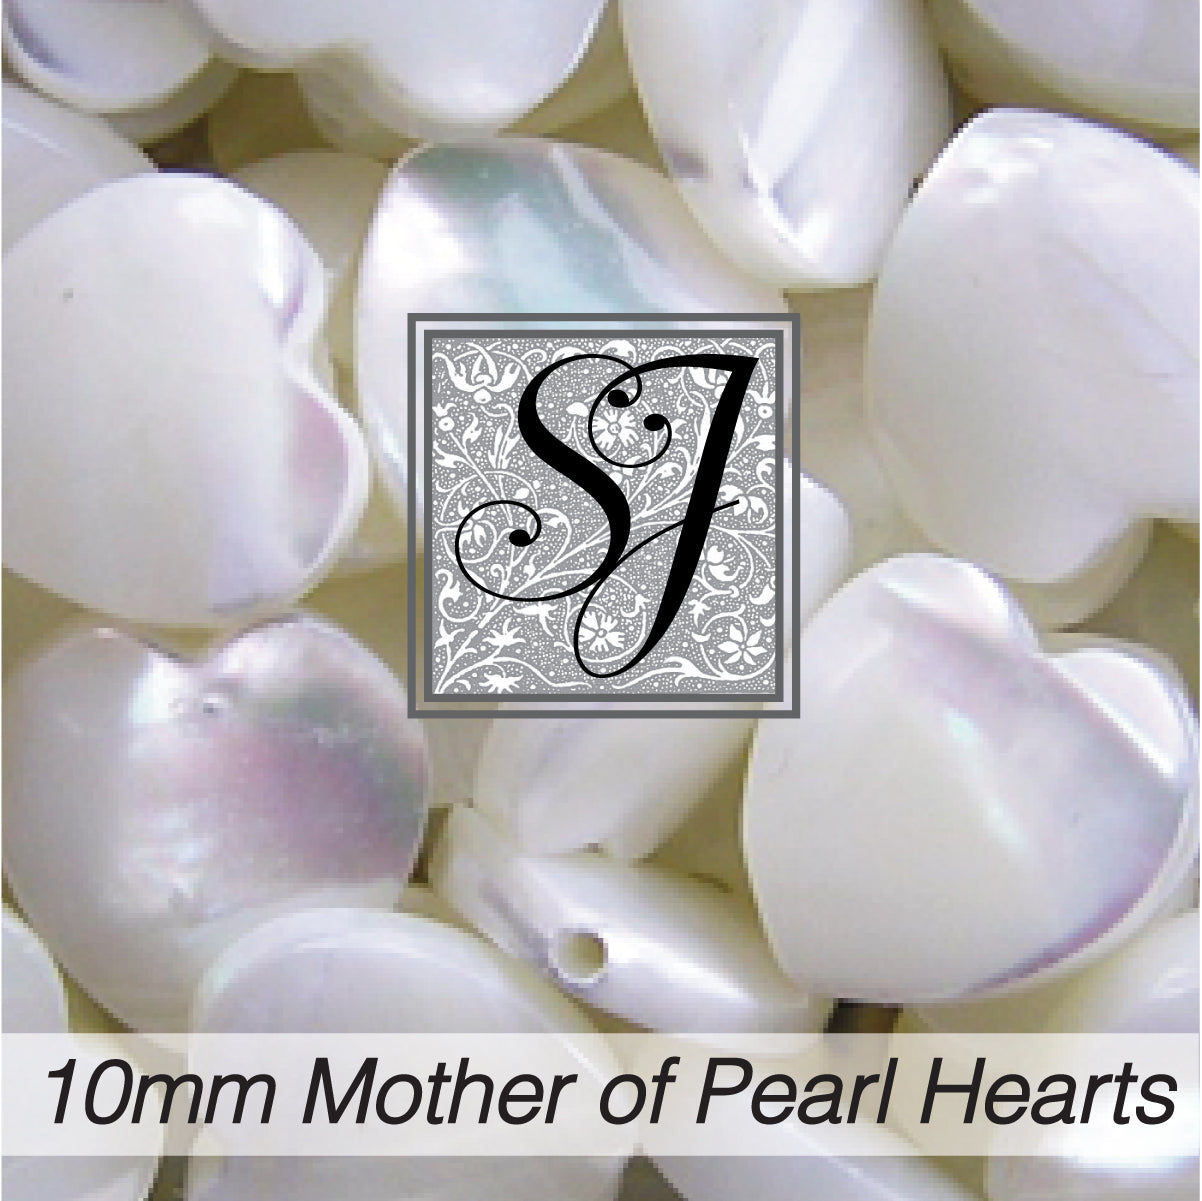 10mm Mother of Pearl Hearts